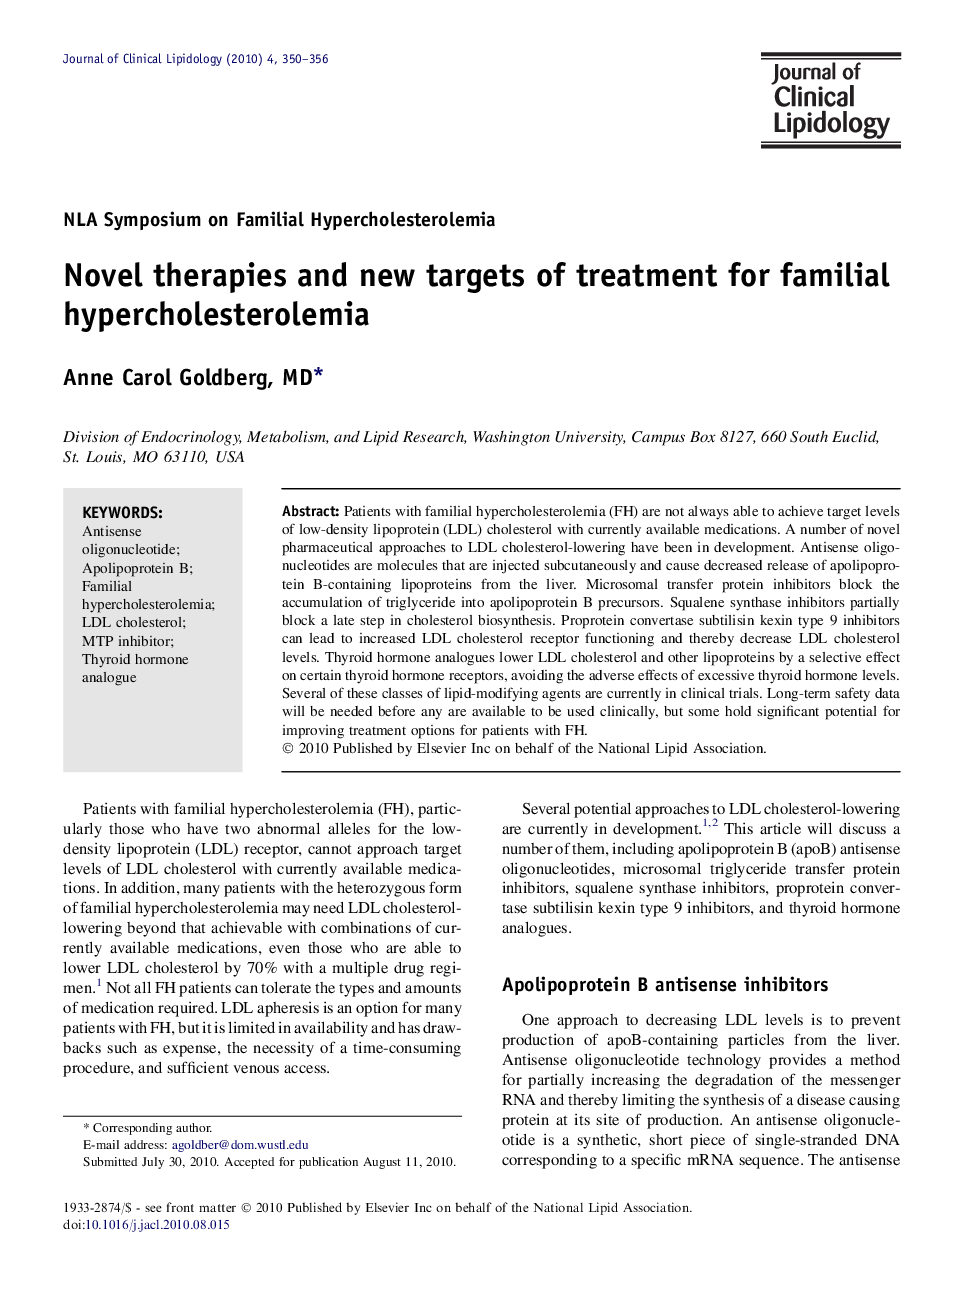 Novel therapies and new targets of treatment for familial hypercholesterolemia